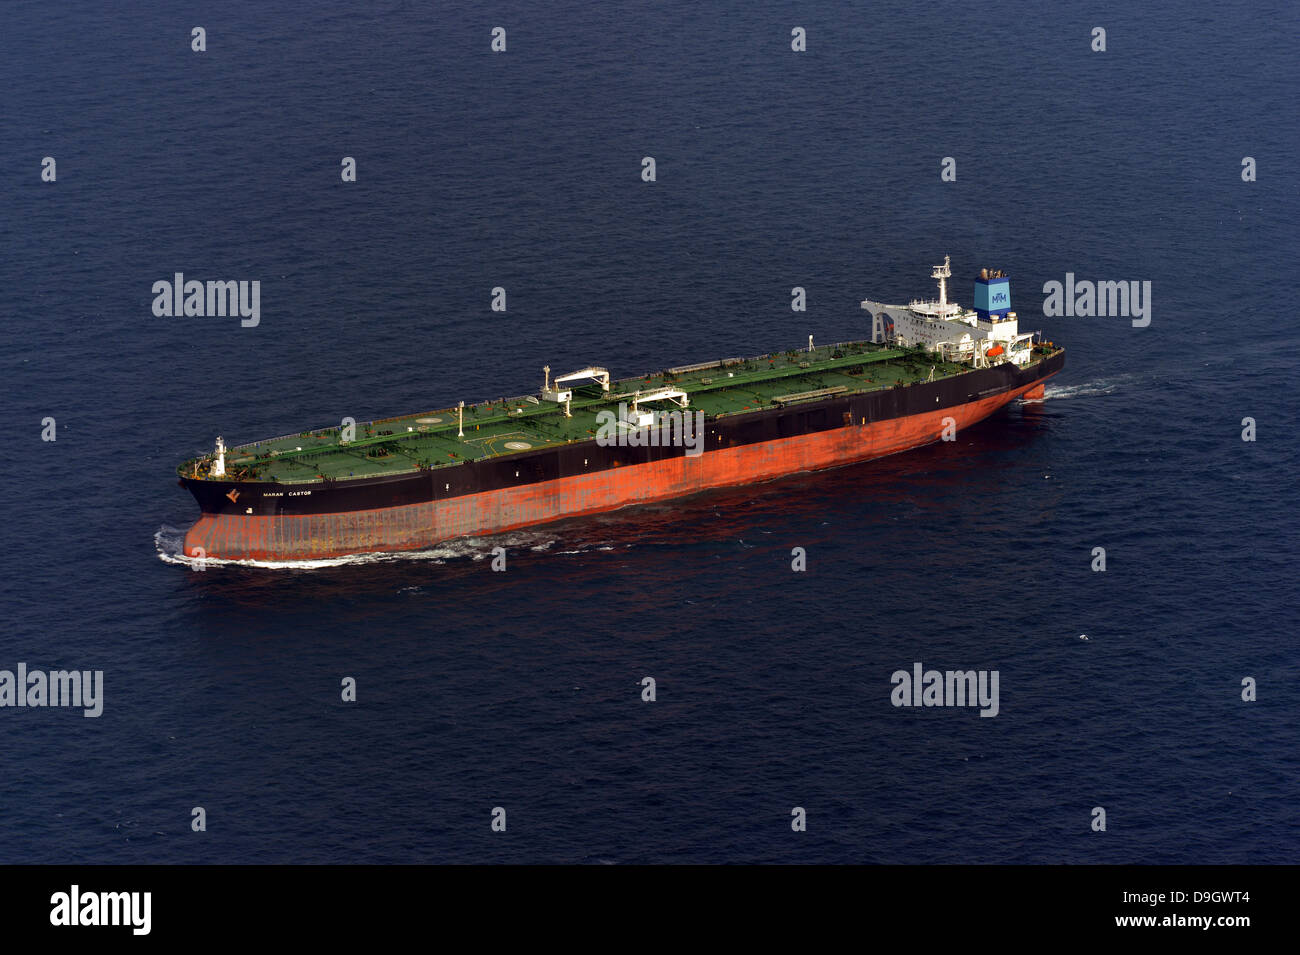 December 11, 2012 - The oil tanker Maran Castor is underway in the Arabian Sea during exercise Lucky Mariner 13. Stock Photo